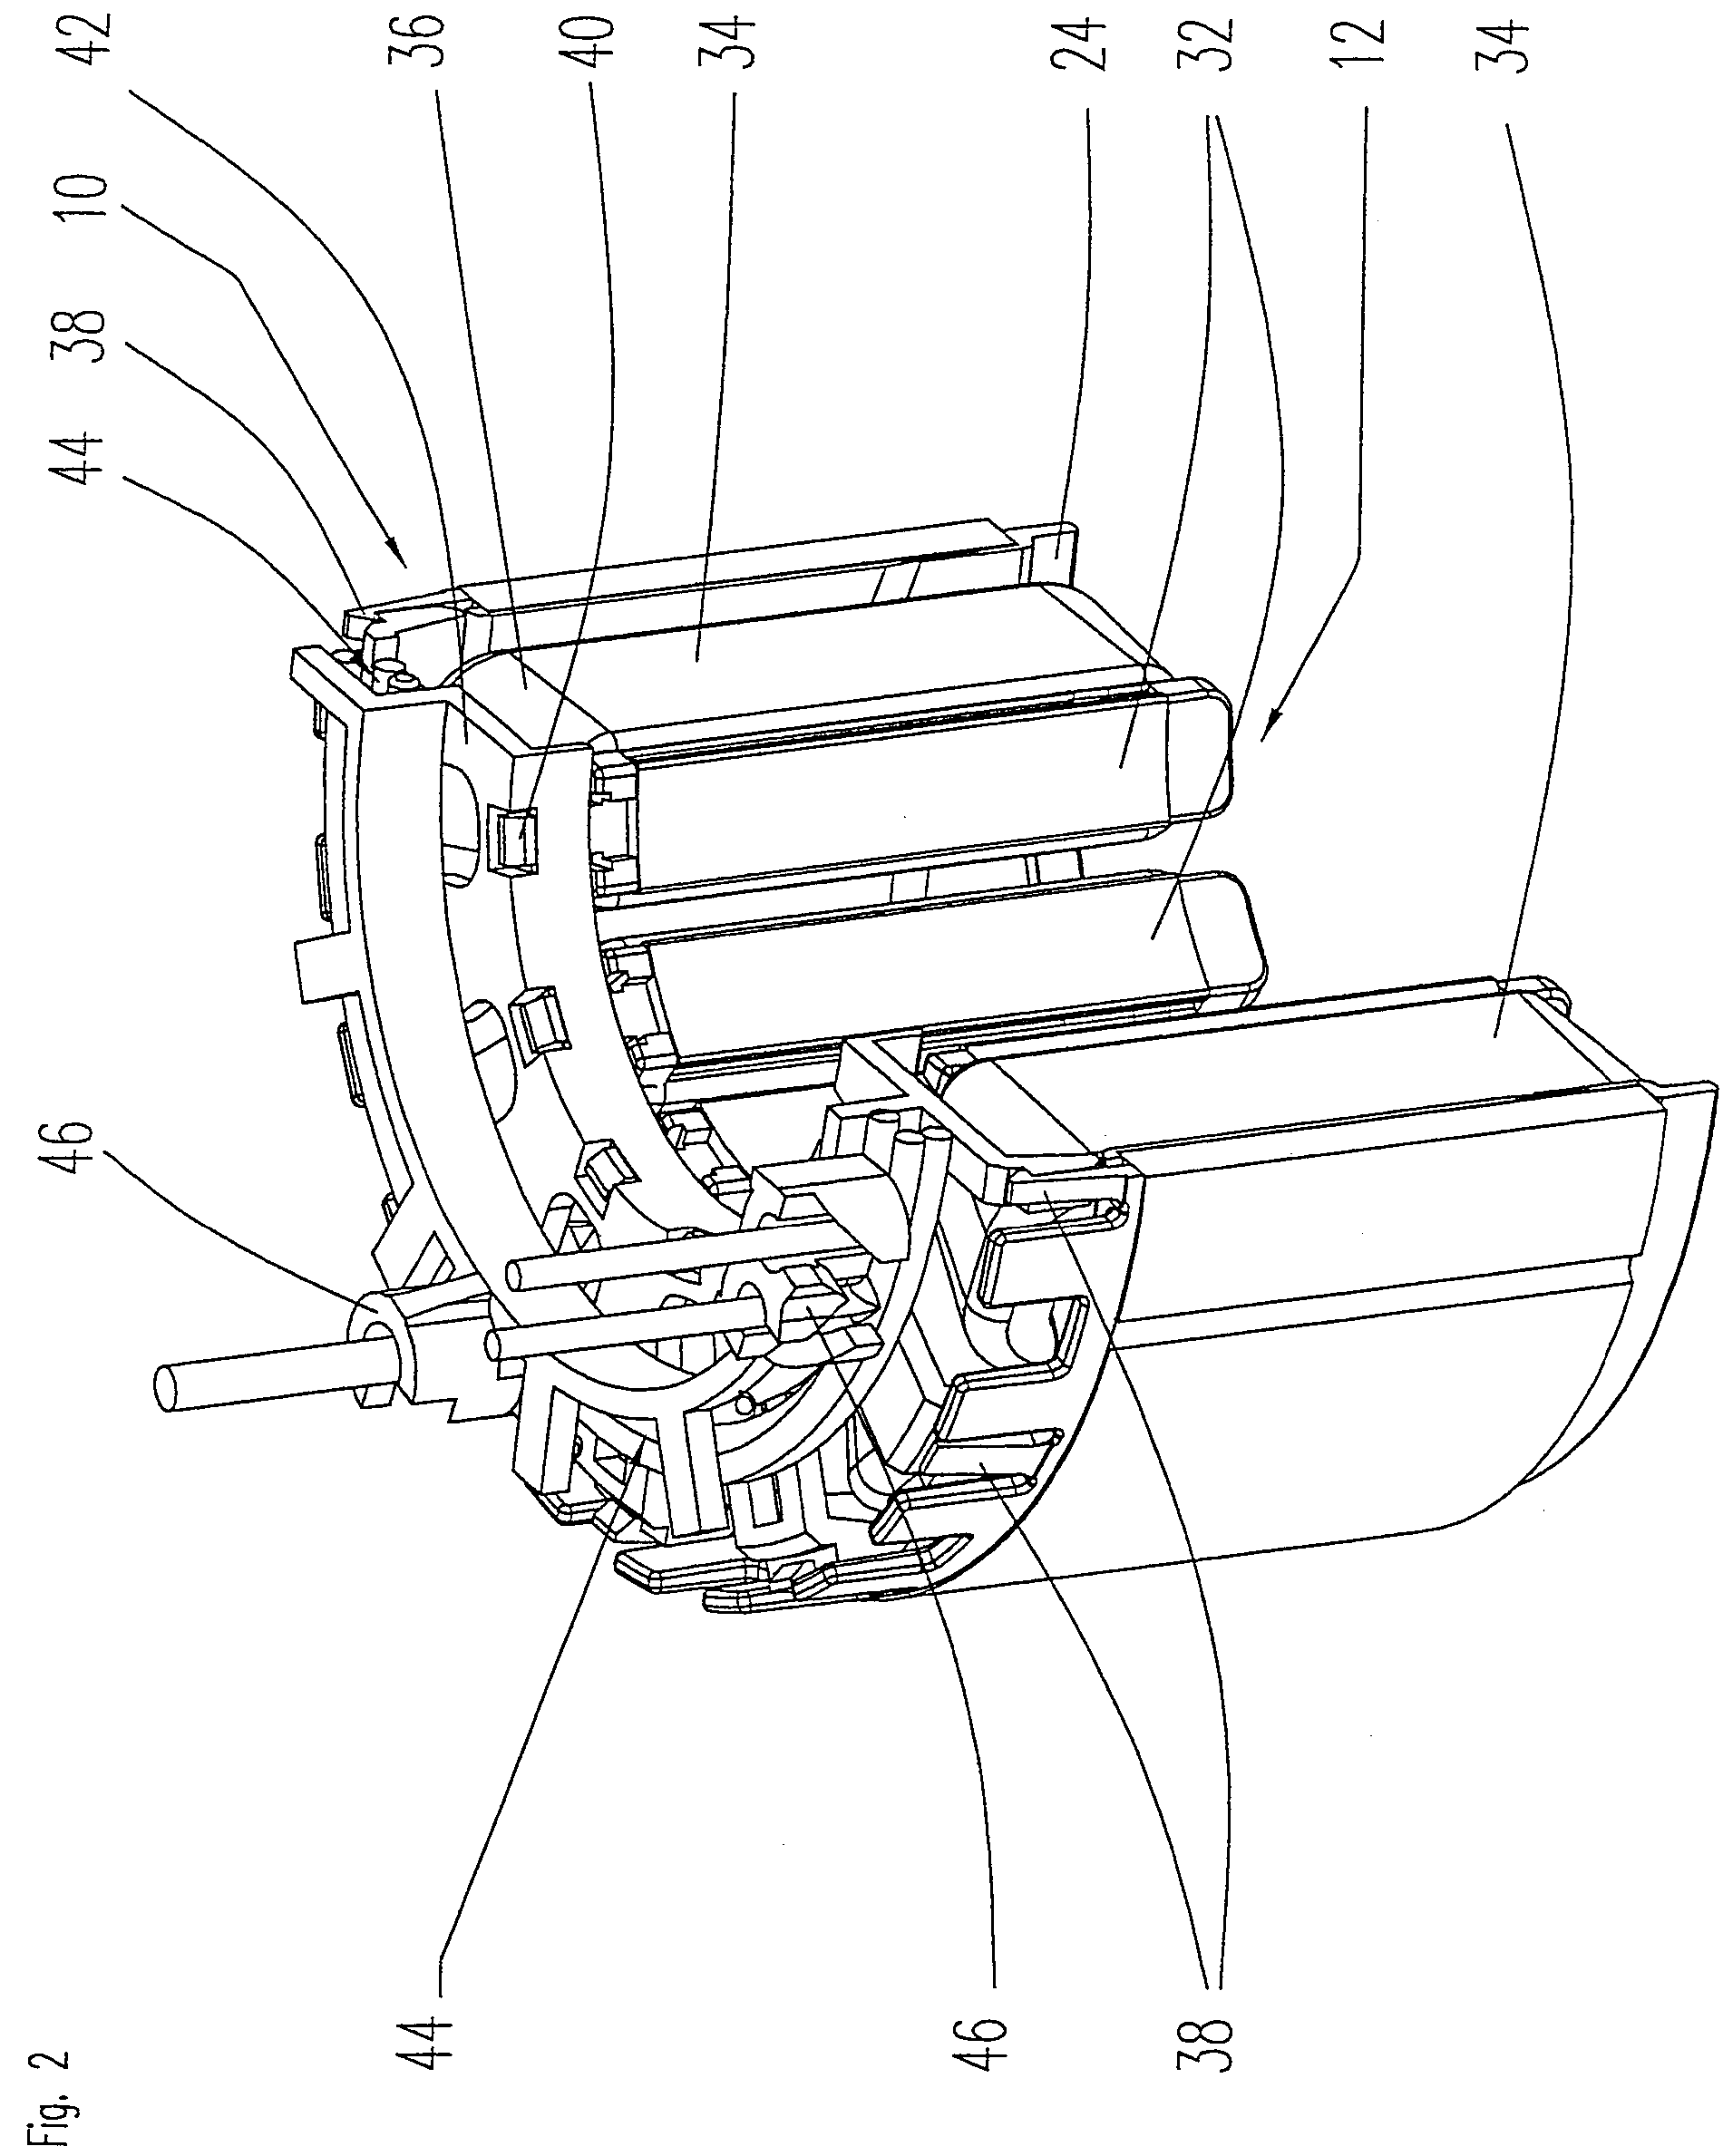 Device for the insulation of stator slots